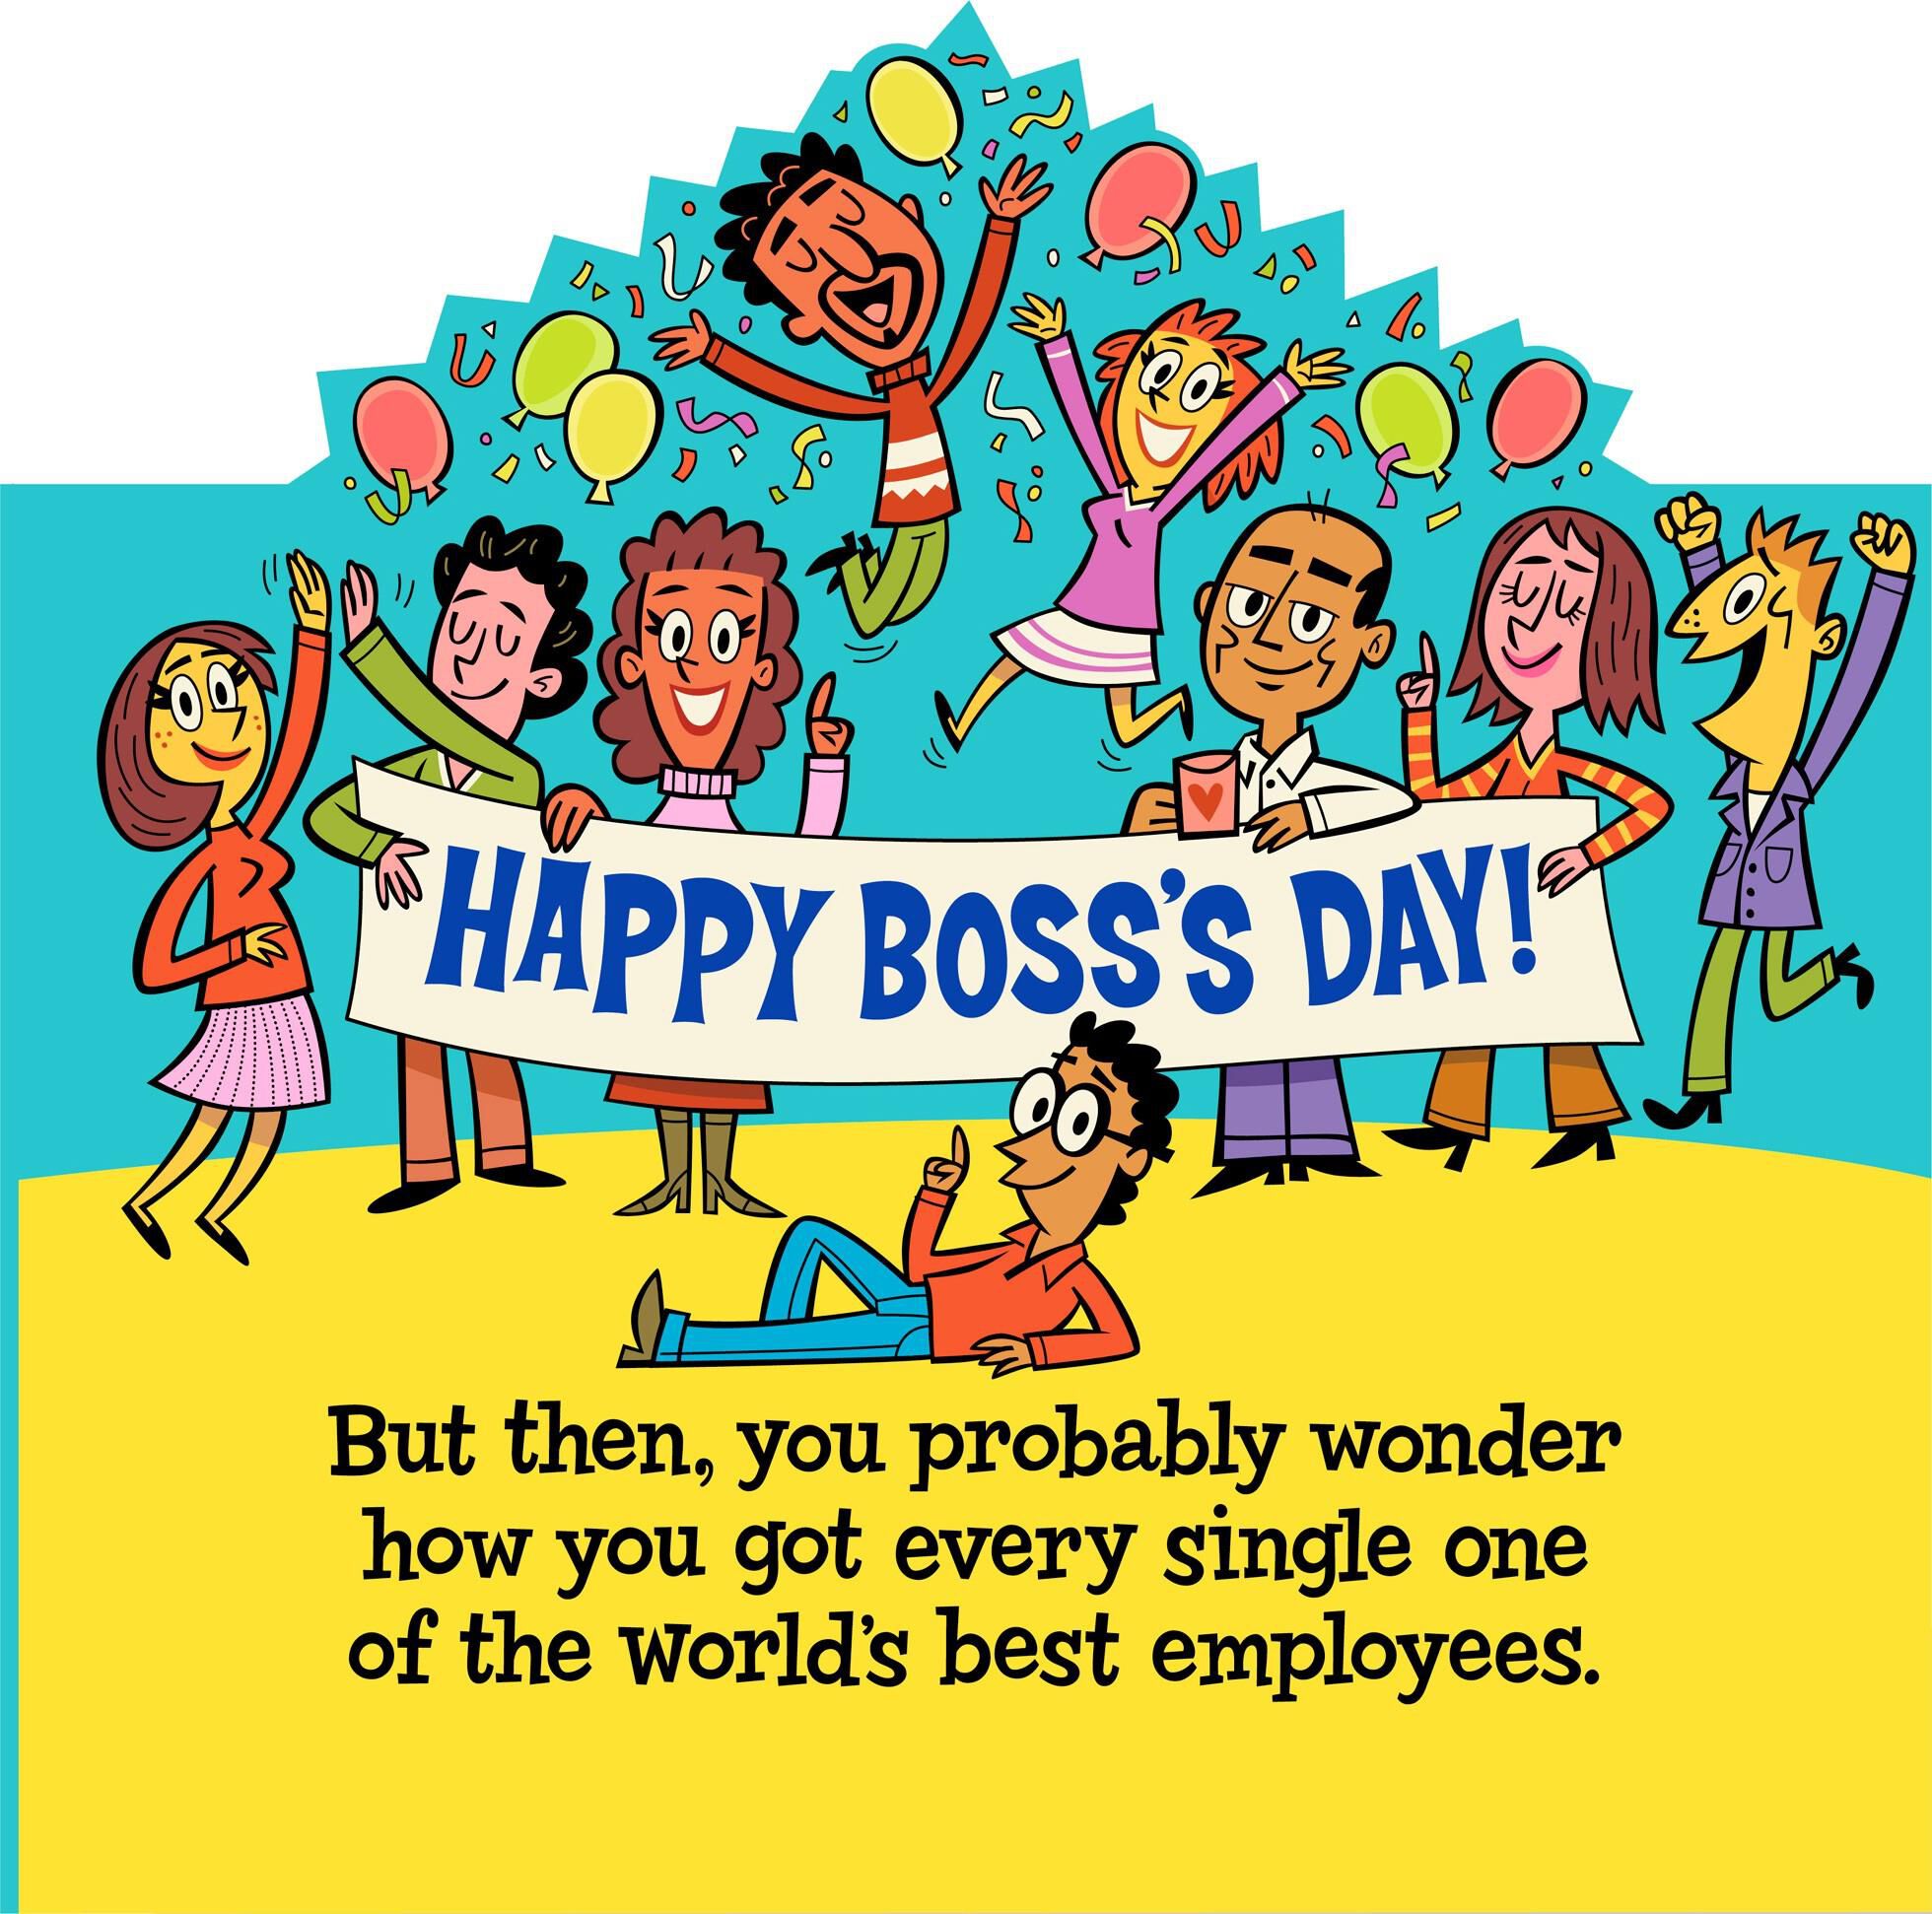 World s Best Boss and Employees Funny Boss s Day Card From Us  